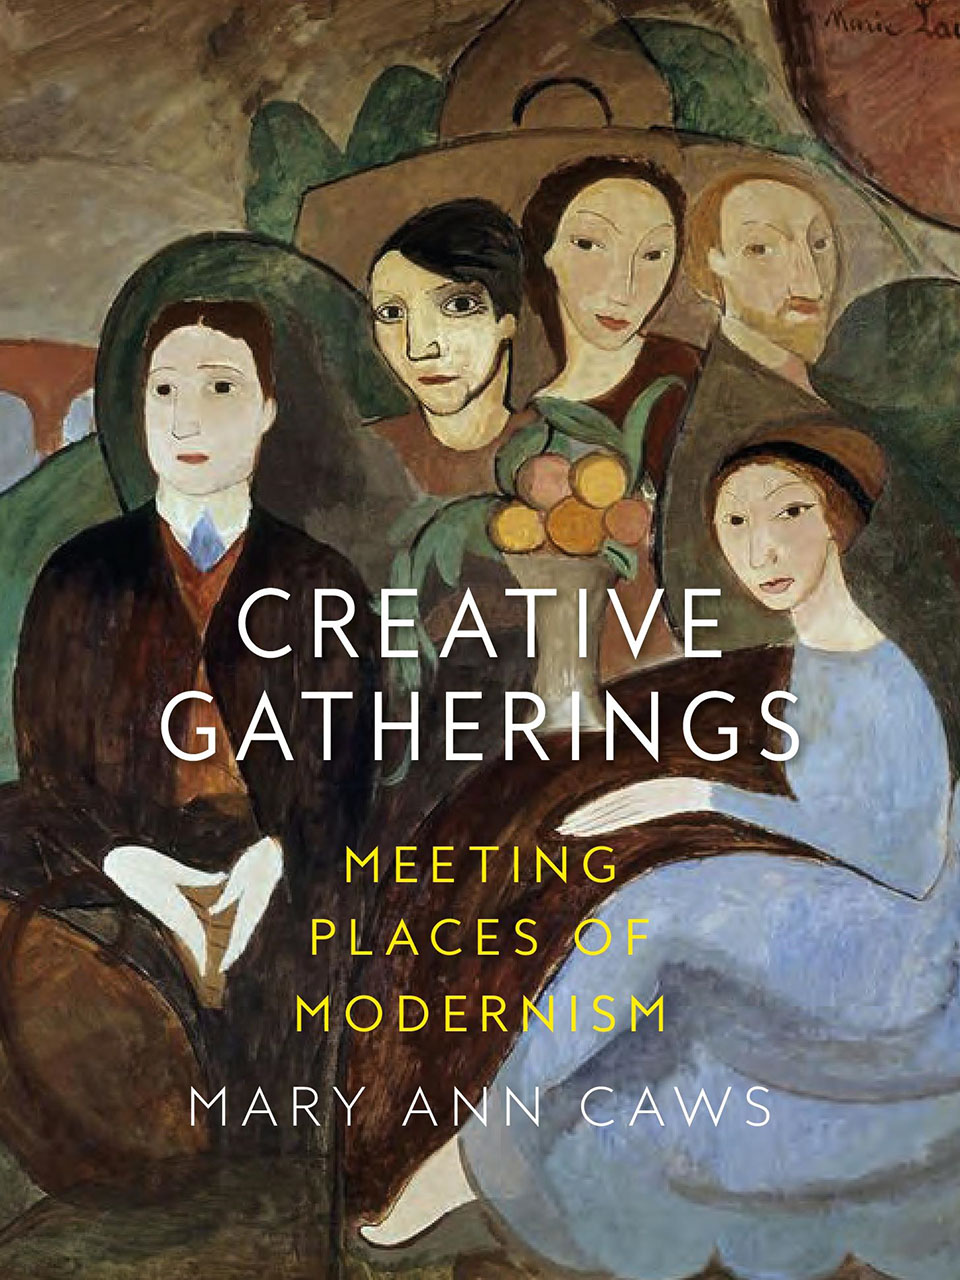 Creative gatherings meeting places of modernism